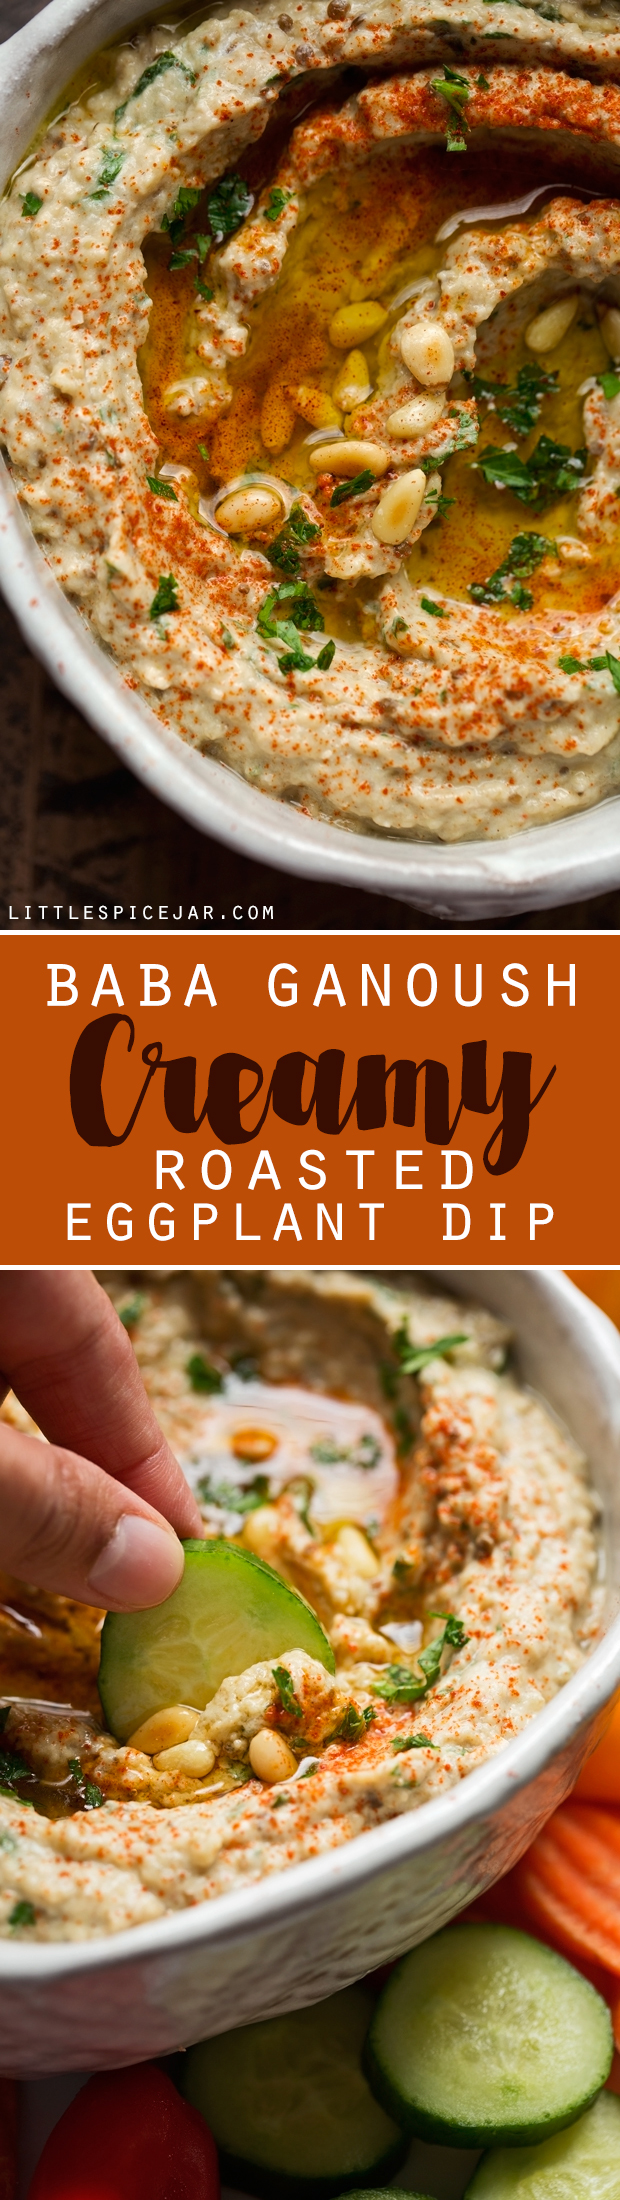 Homemade Baba Ganoush - simple ingredients and so much flavor! Tastes just like your favorite restaurants - and light on the calories too! #babaganoush #eggplantdip #roastedeggplantdip | Littlespicejar.com